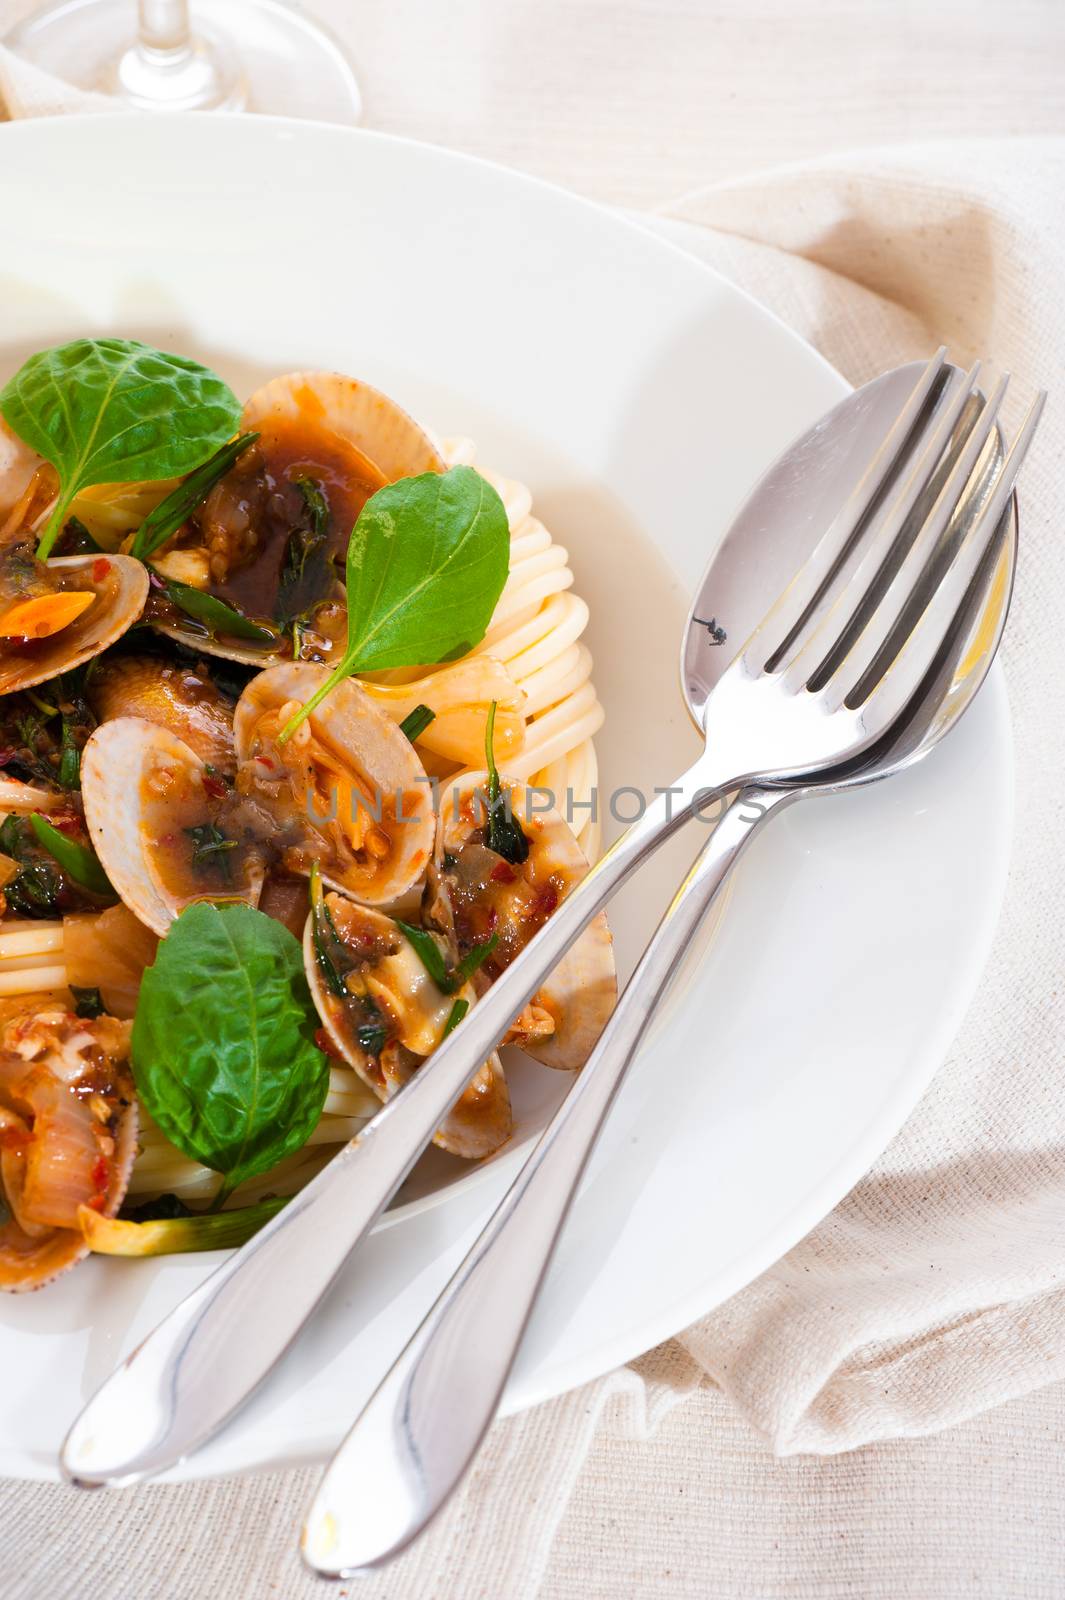 A white plate with delicious spaghetti shellfish and green basil.